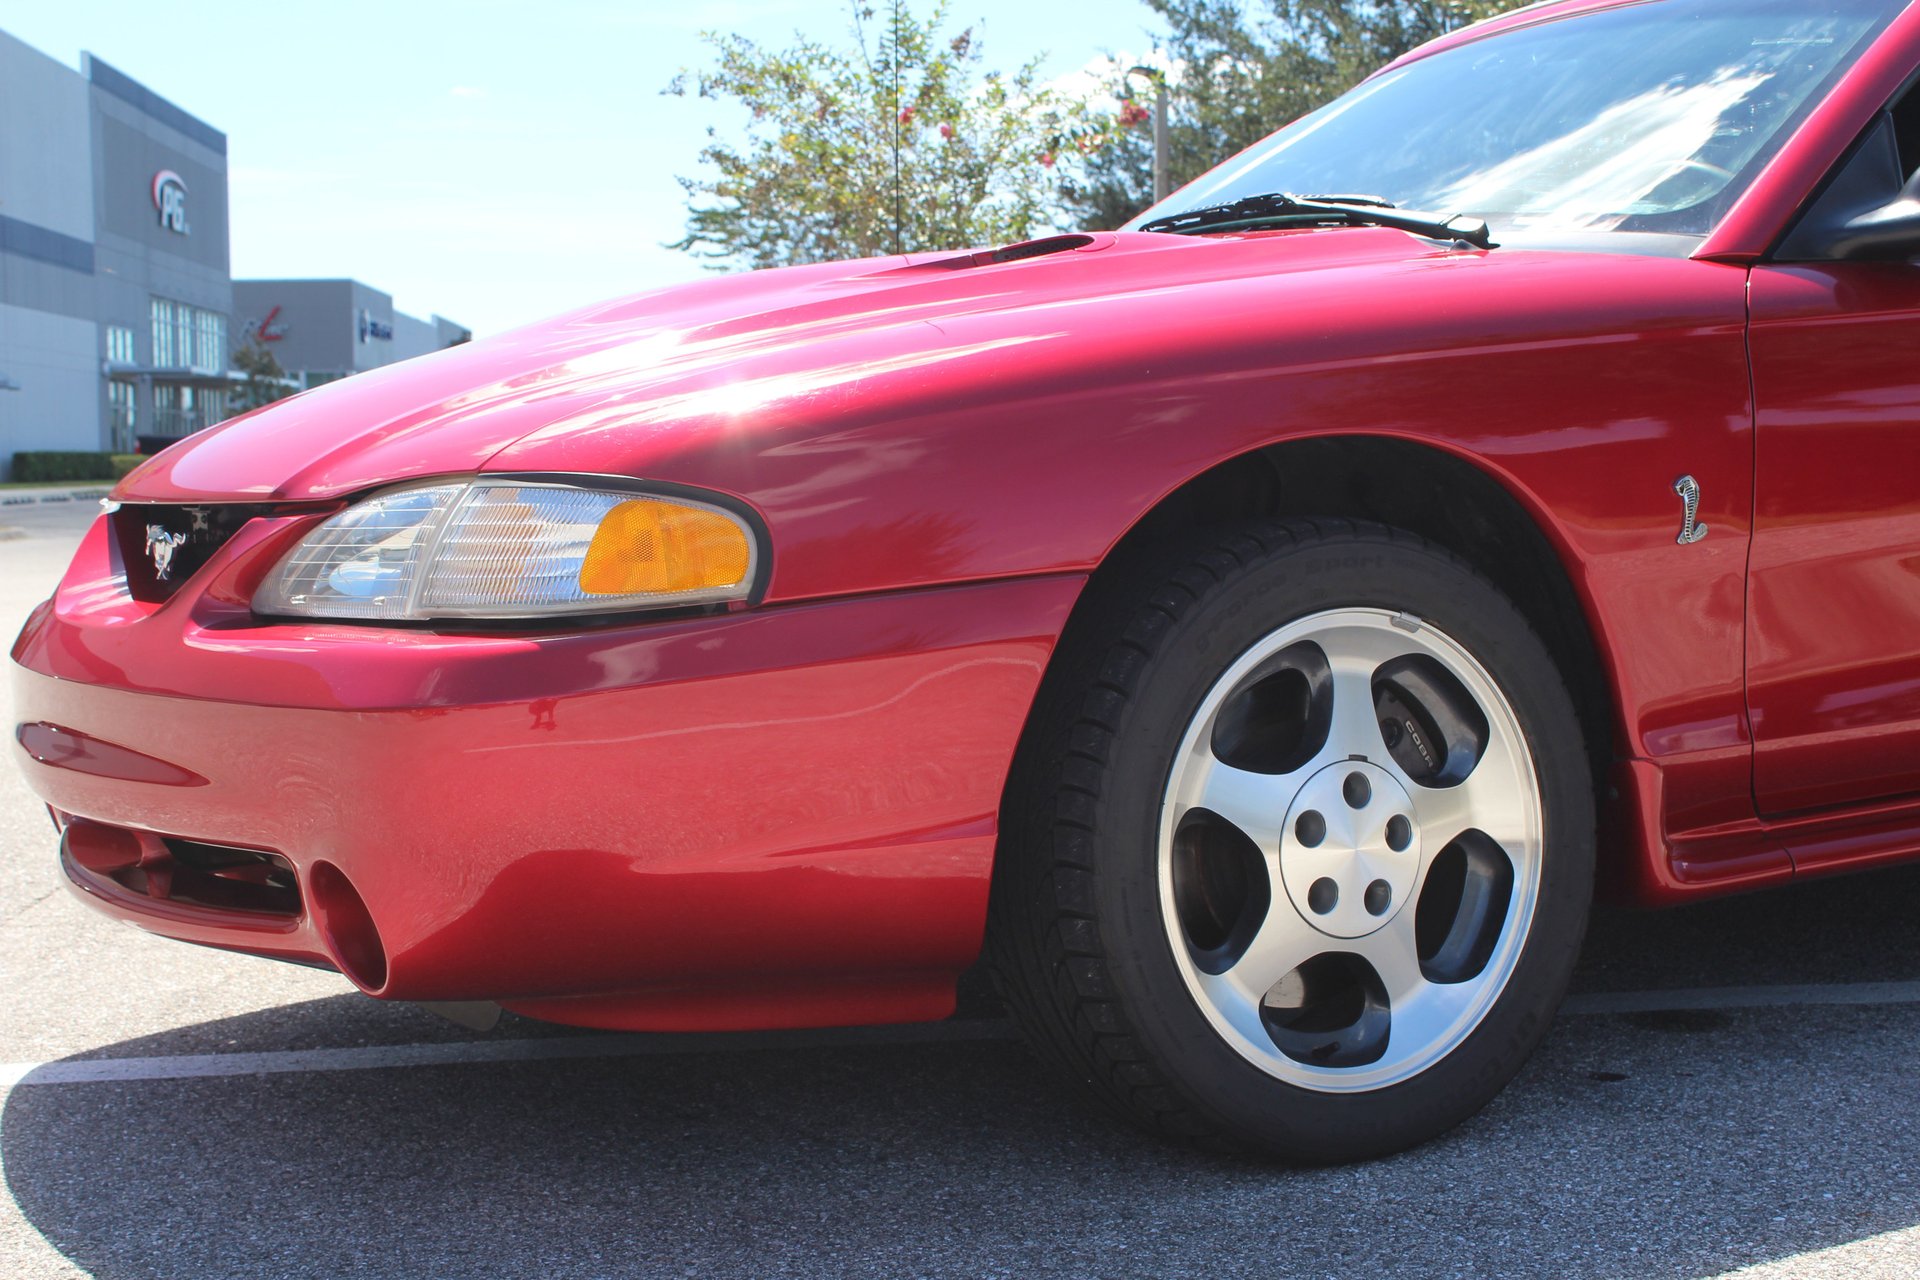 For Sale 1996 Ford Mustang